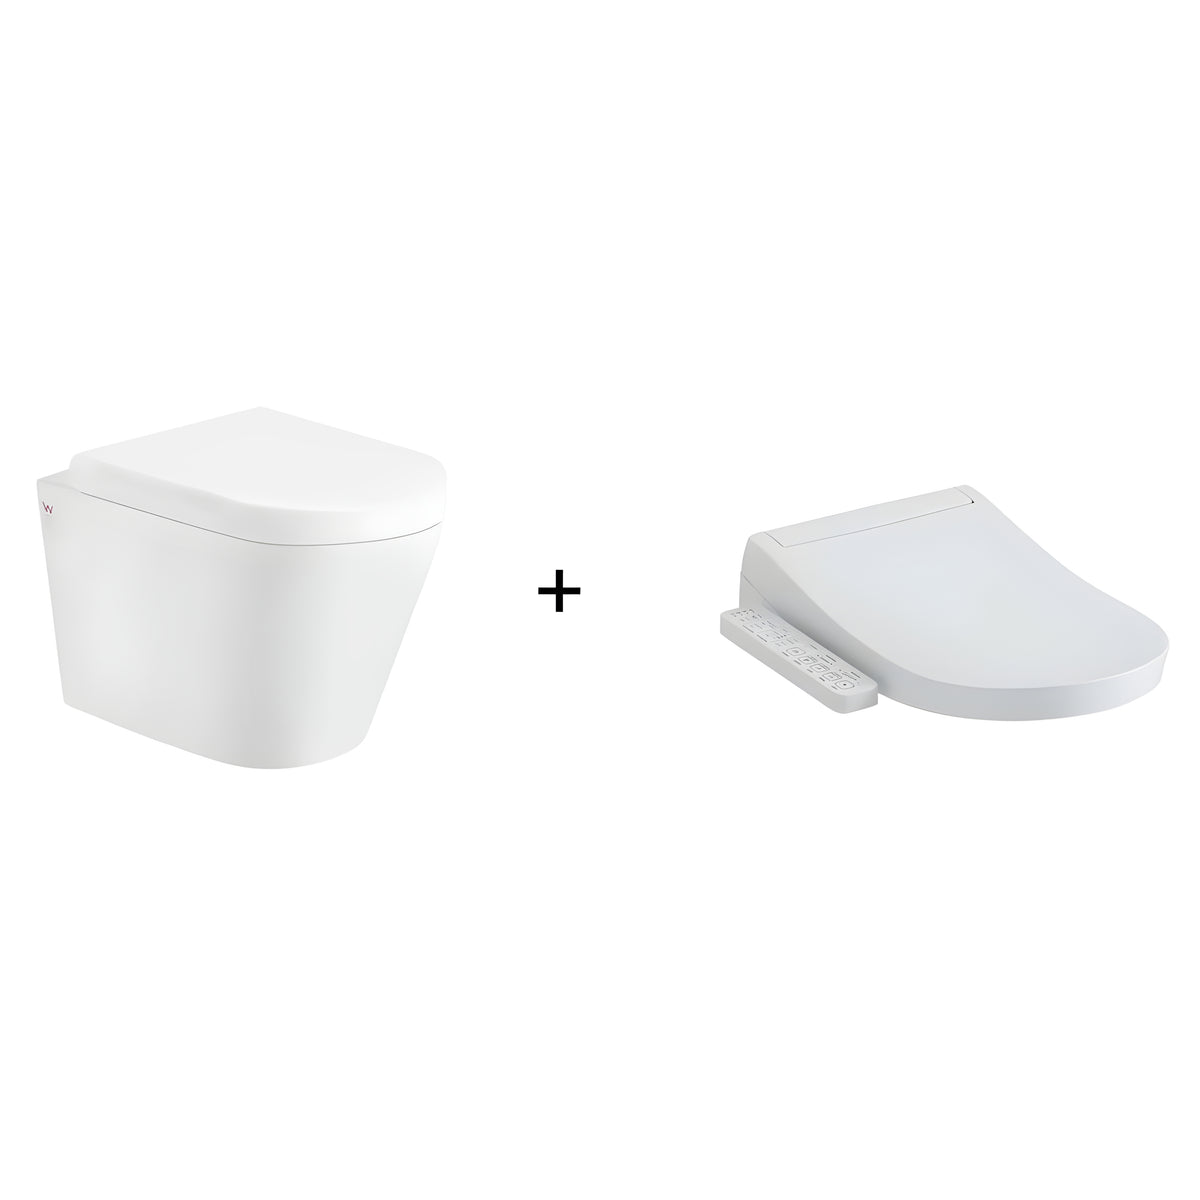 TOTO S2 WASHLET W/ SIDE CONTROL AND WALL HUNG RIMLESS TOILET PACKAGE D-SHAPED GLOSS WHITE